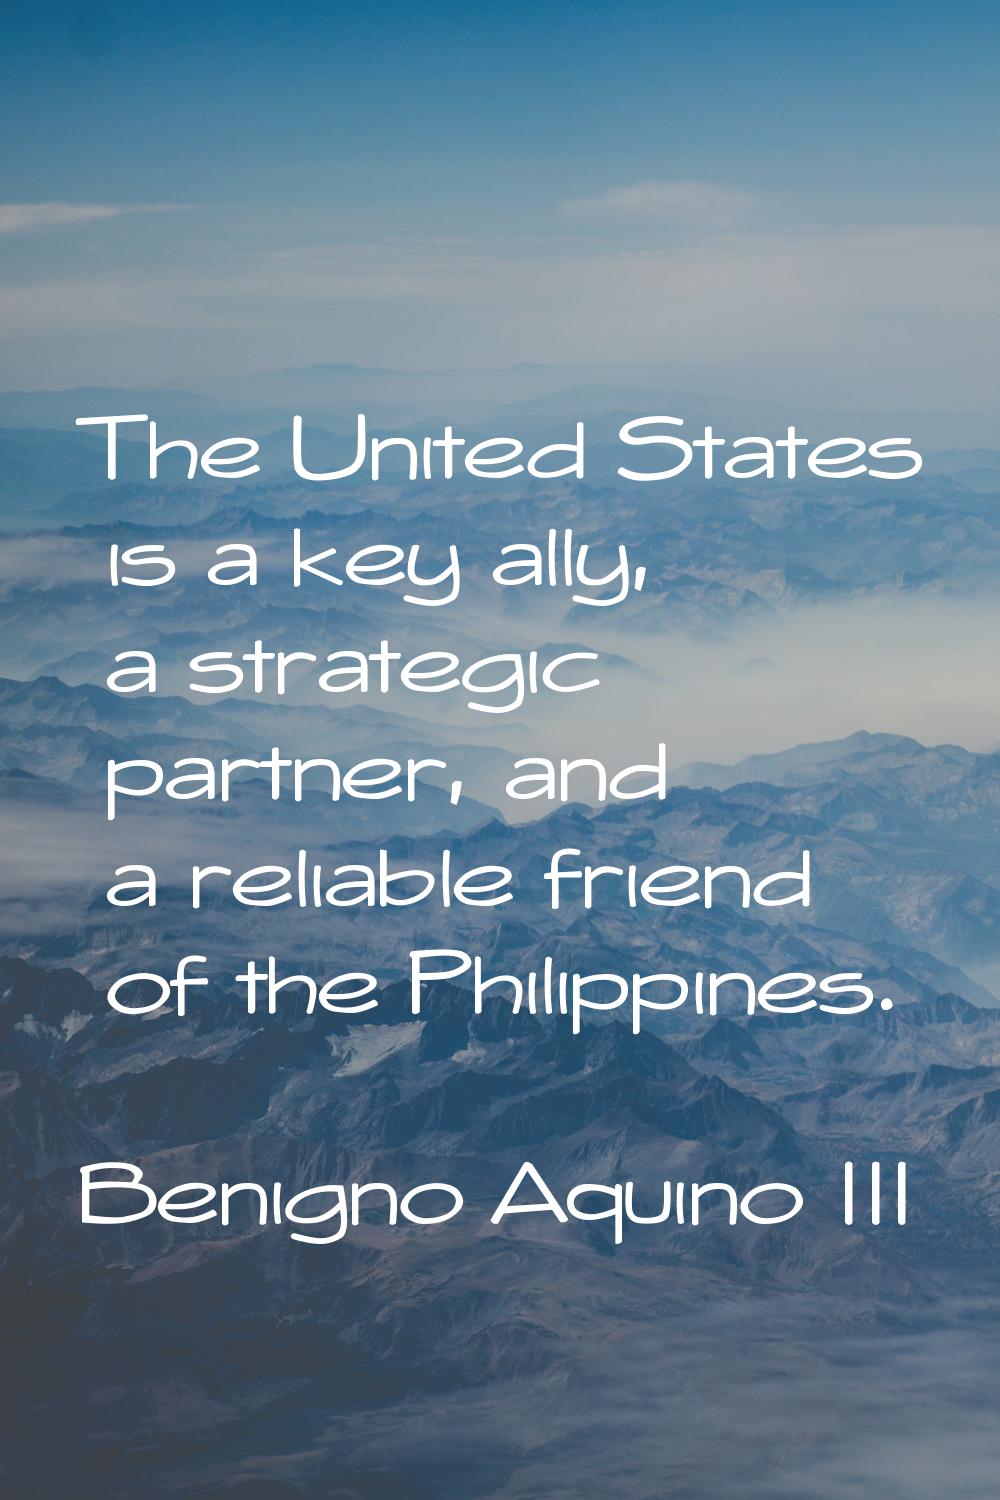 The United States is a key ally, a strategic partner, and a reliable friend of the Philippines.